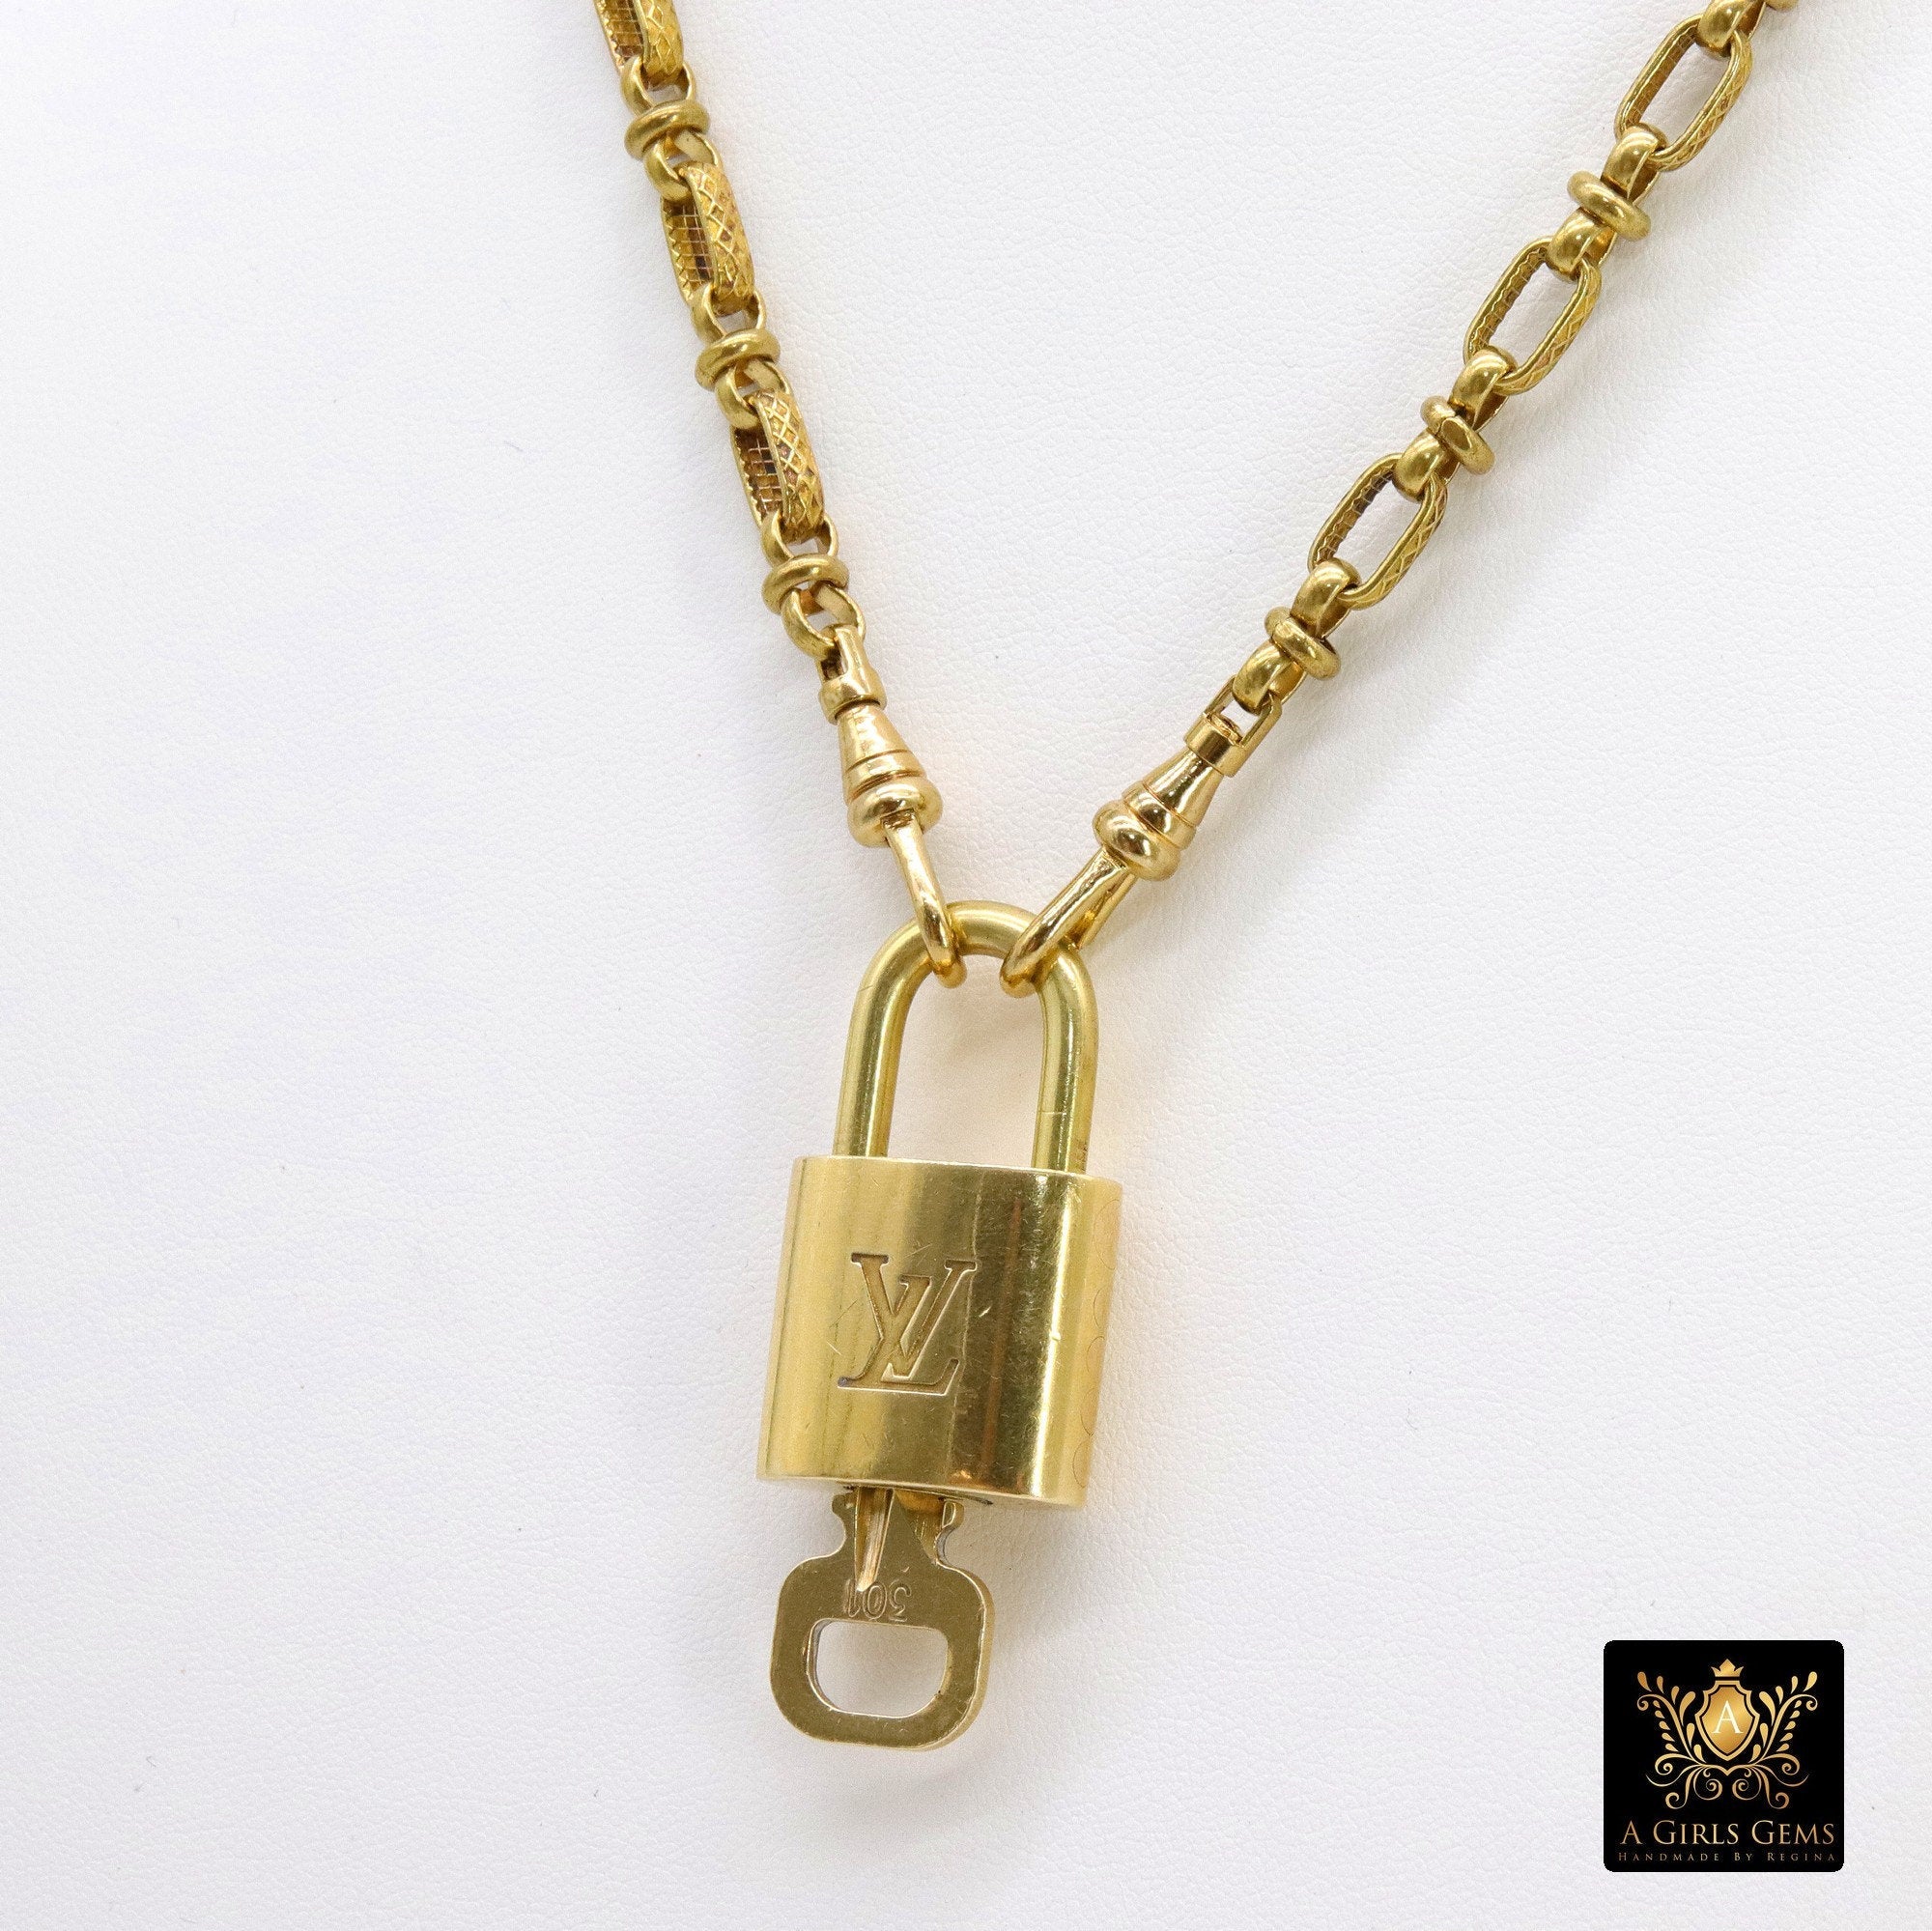 Lock and Key Fob Necklace, LV Lock and Vintage Textured A Girls Gems